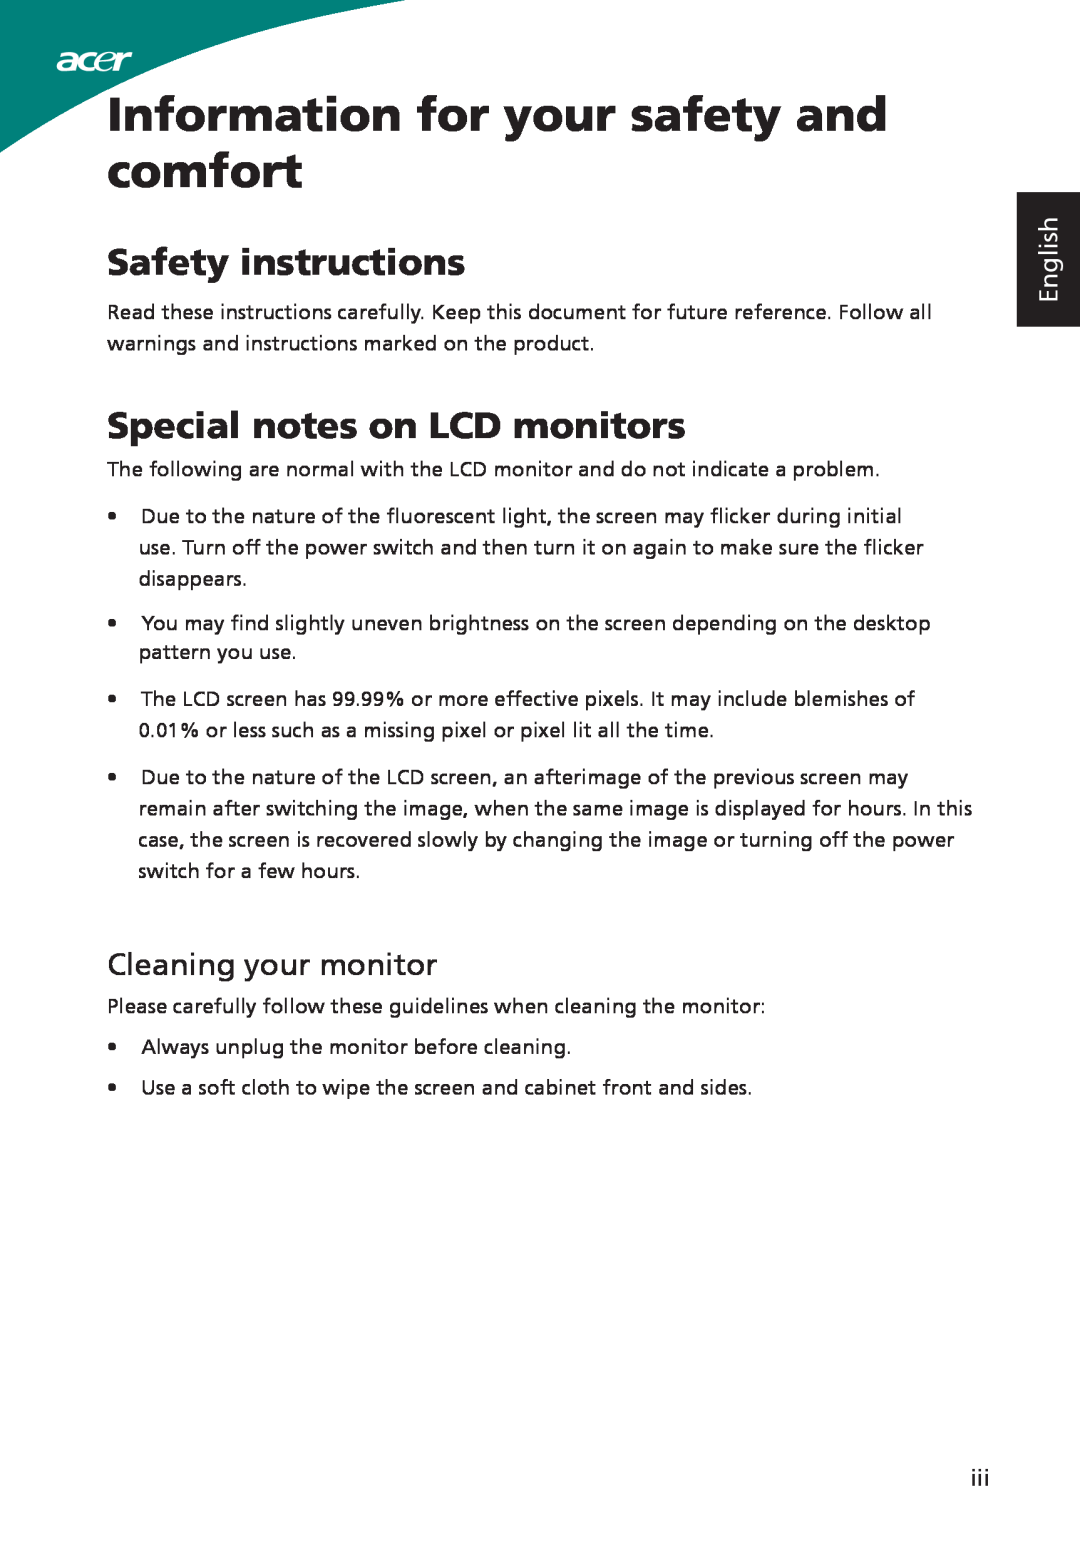 Acer ADP-40PH BB Information for your safety and comfort, Safety instructions, Special notes on LCD monitors, English 